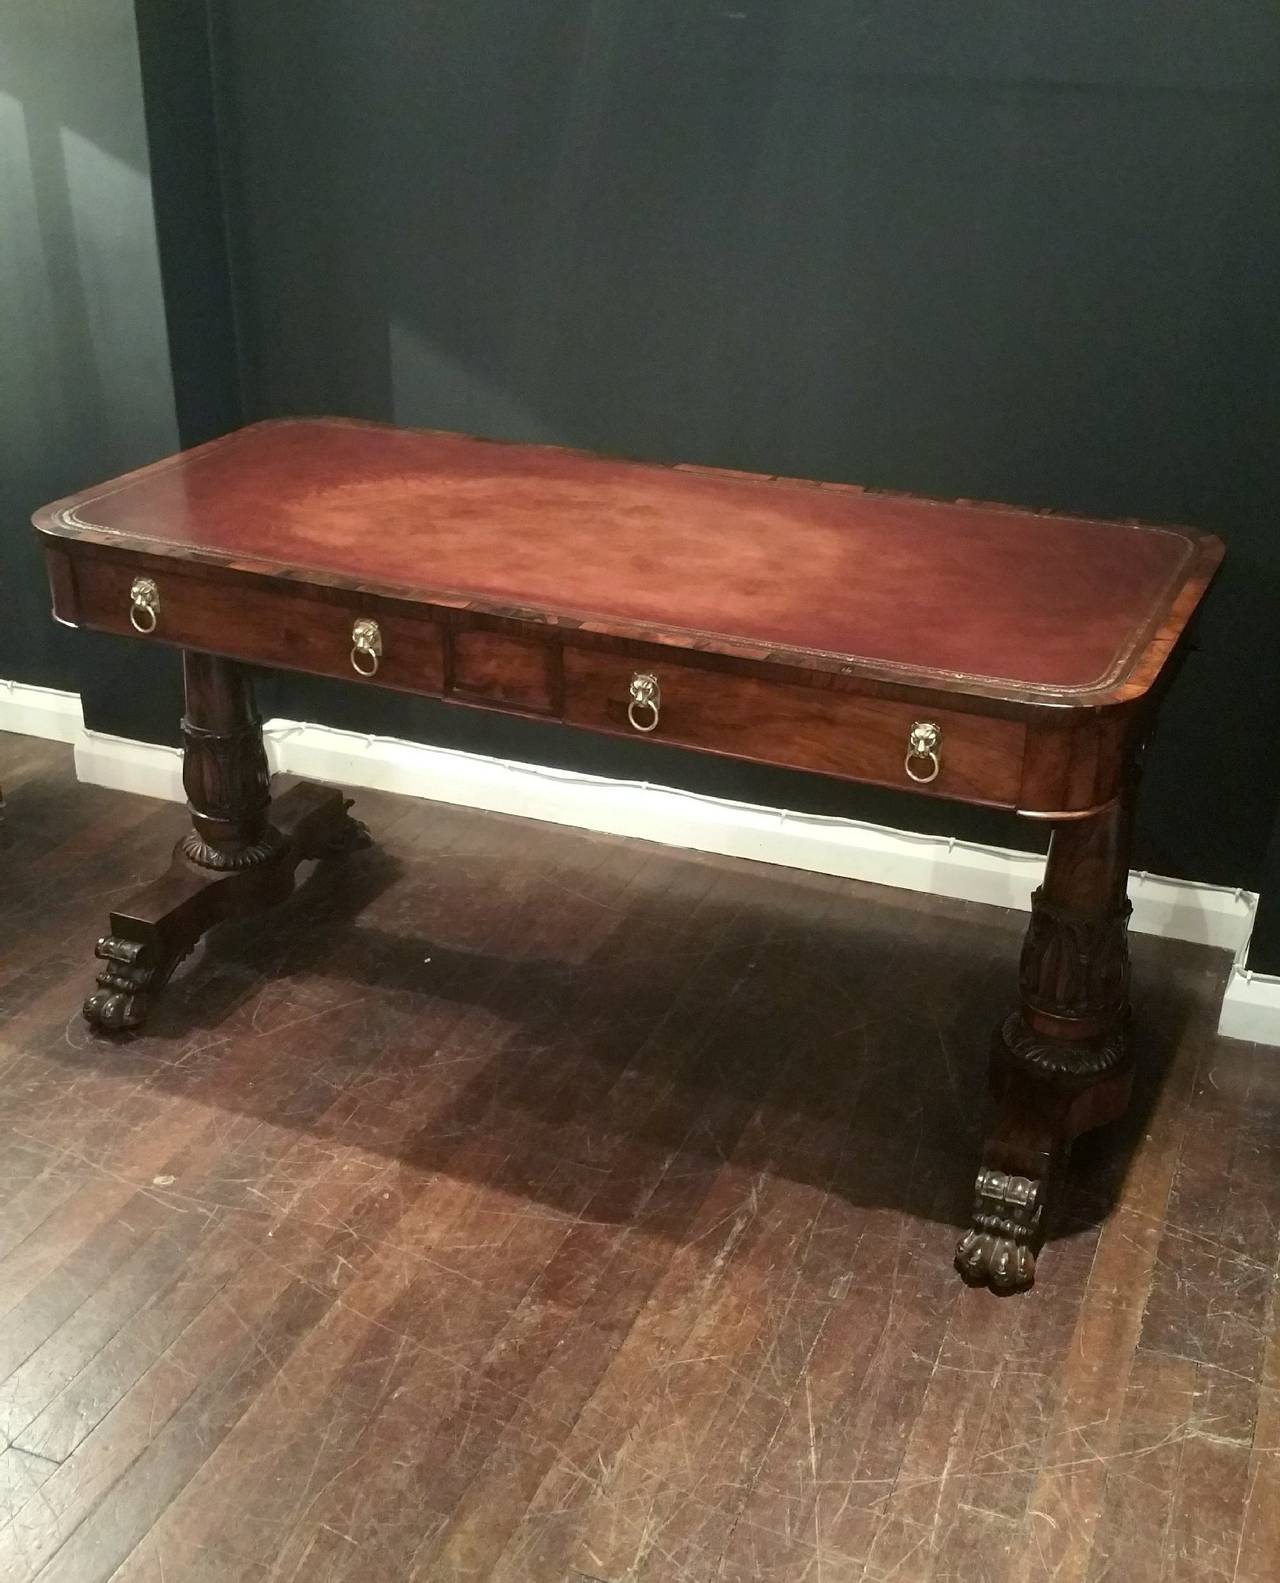 This superb and very handsome Regency Rosewood library table features a red brown leather tooled top with lion’s head and brass ring drawer pulls. The table stands on carved column supports and end with hairy paw feet on brass castors. The table